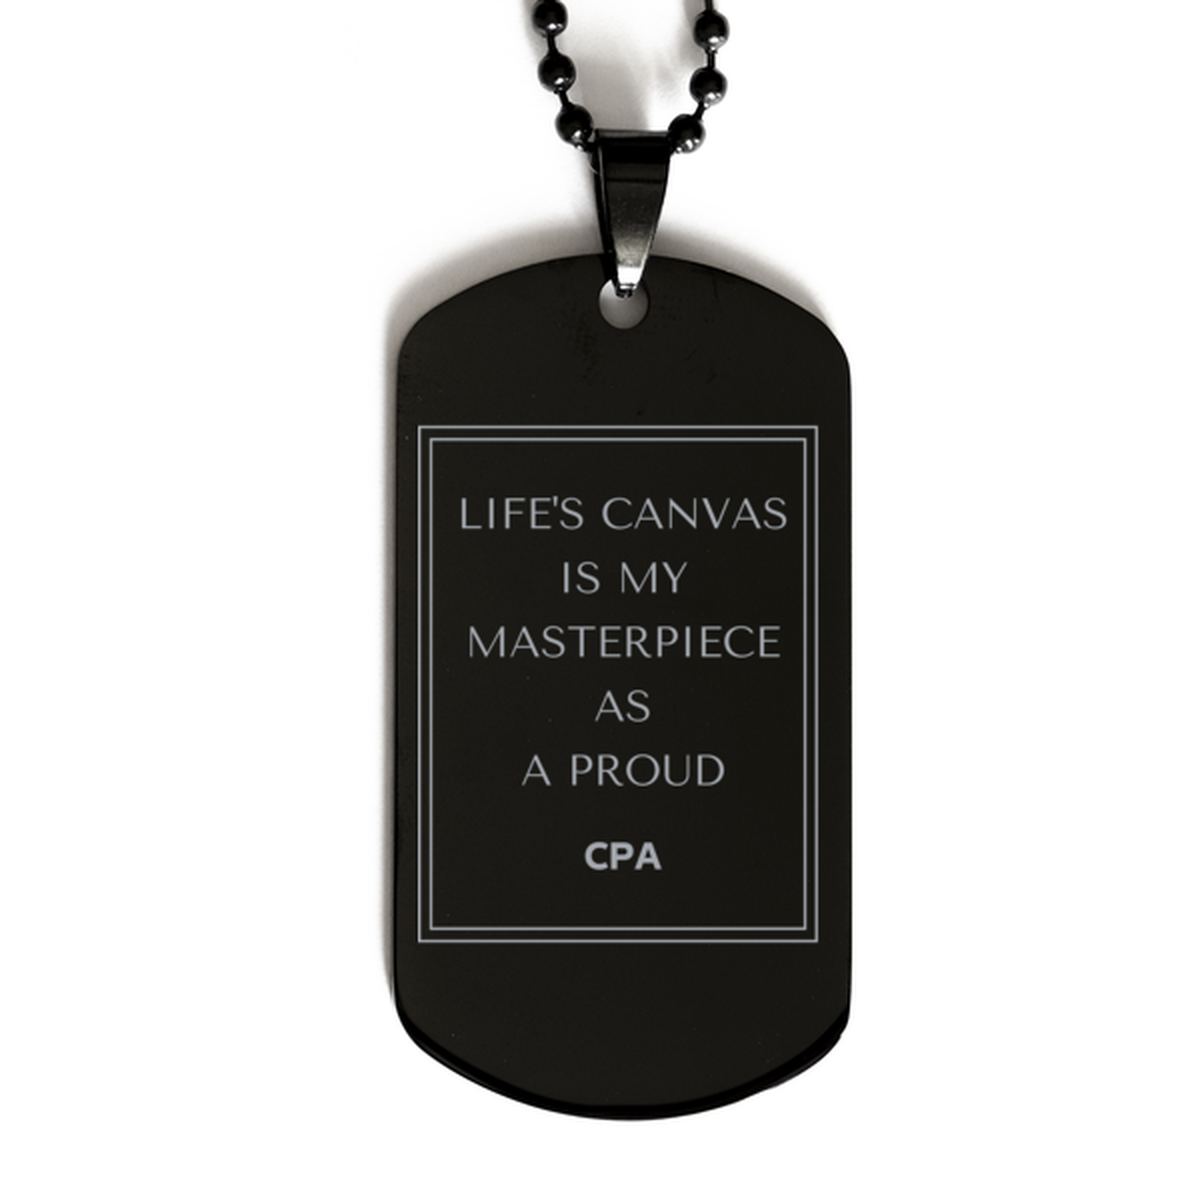 Proud CPA Gifts, Life's canvas is my masterpiece, Epic Birthday Christmas Unique Black Dog Tag For CPA, Coworkers, Men, Women, Friends